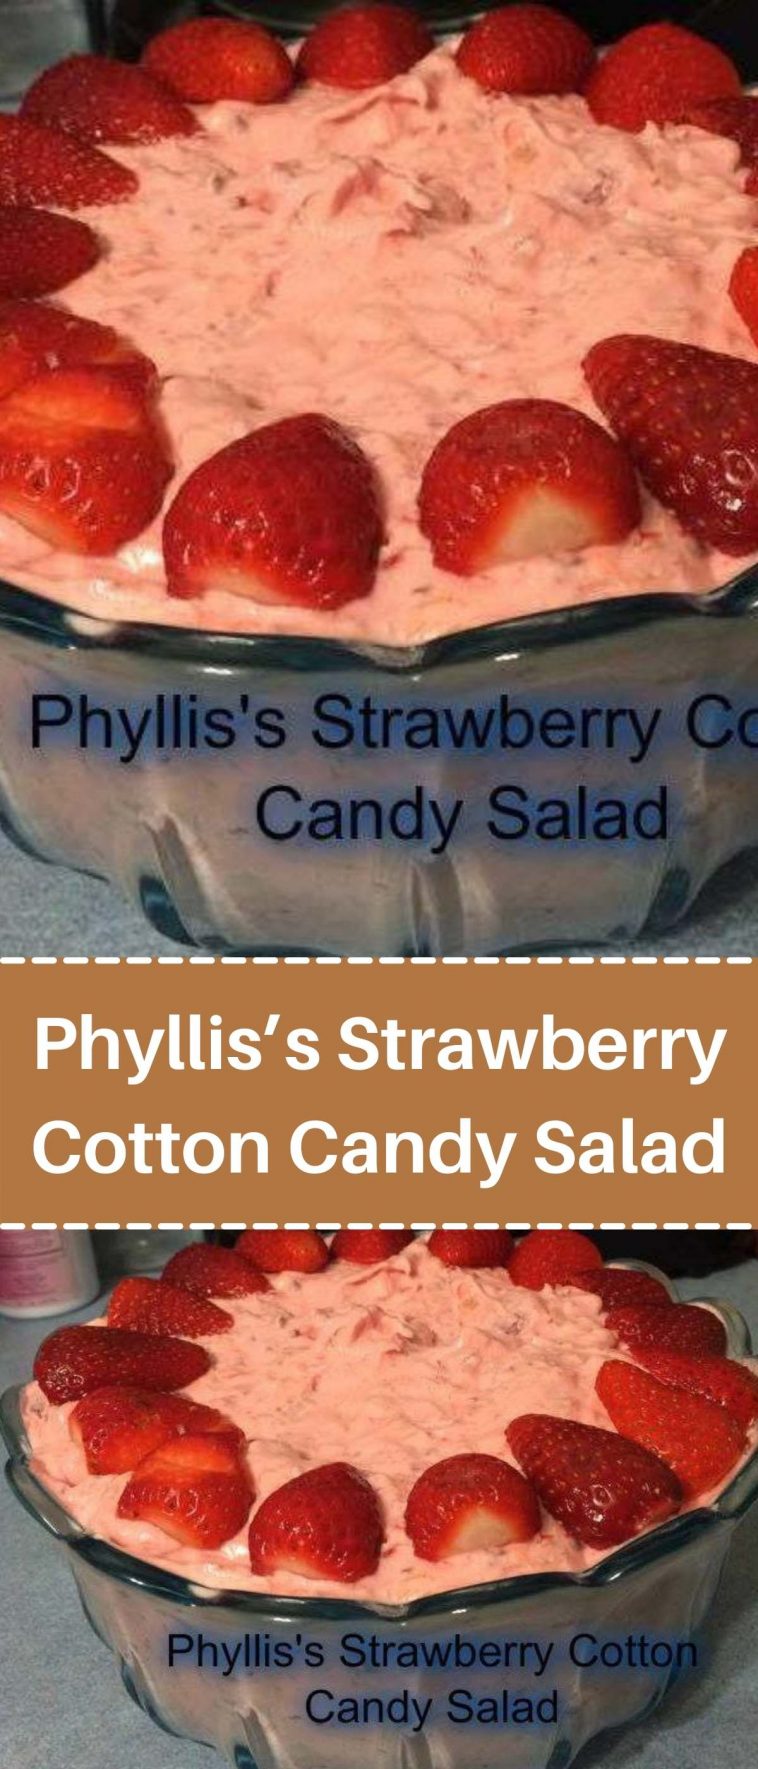 Phyllis’s Strawberry Cotton Candy Salad